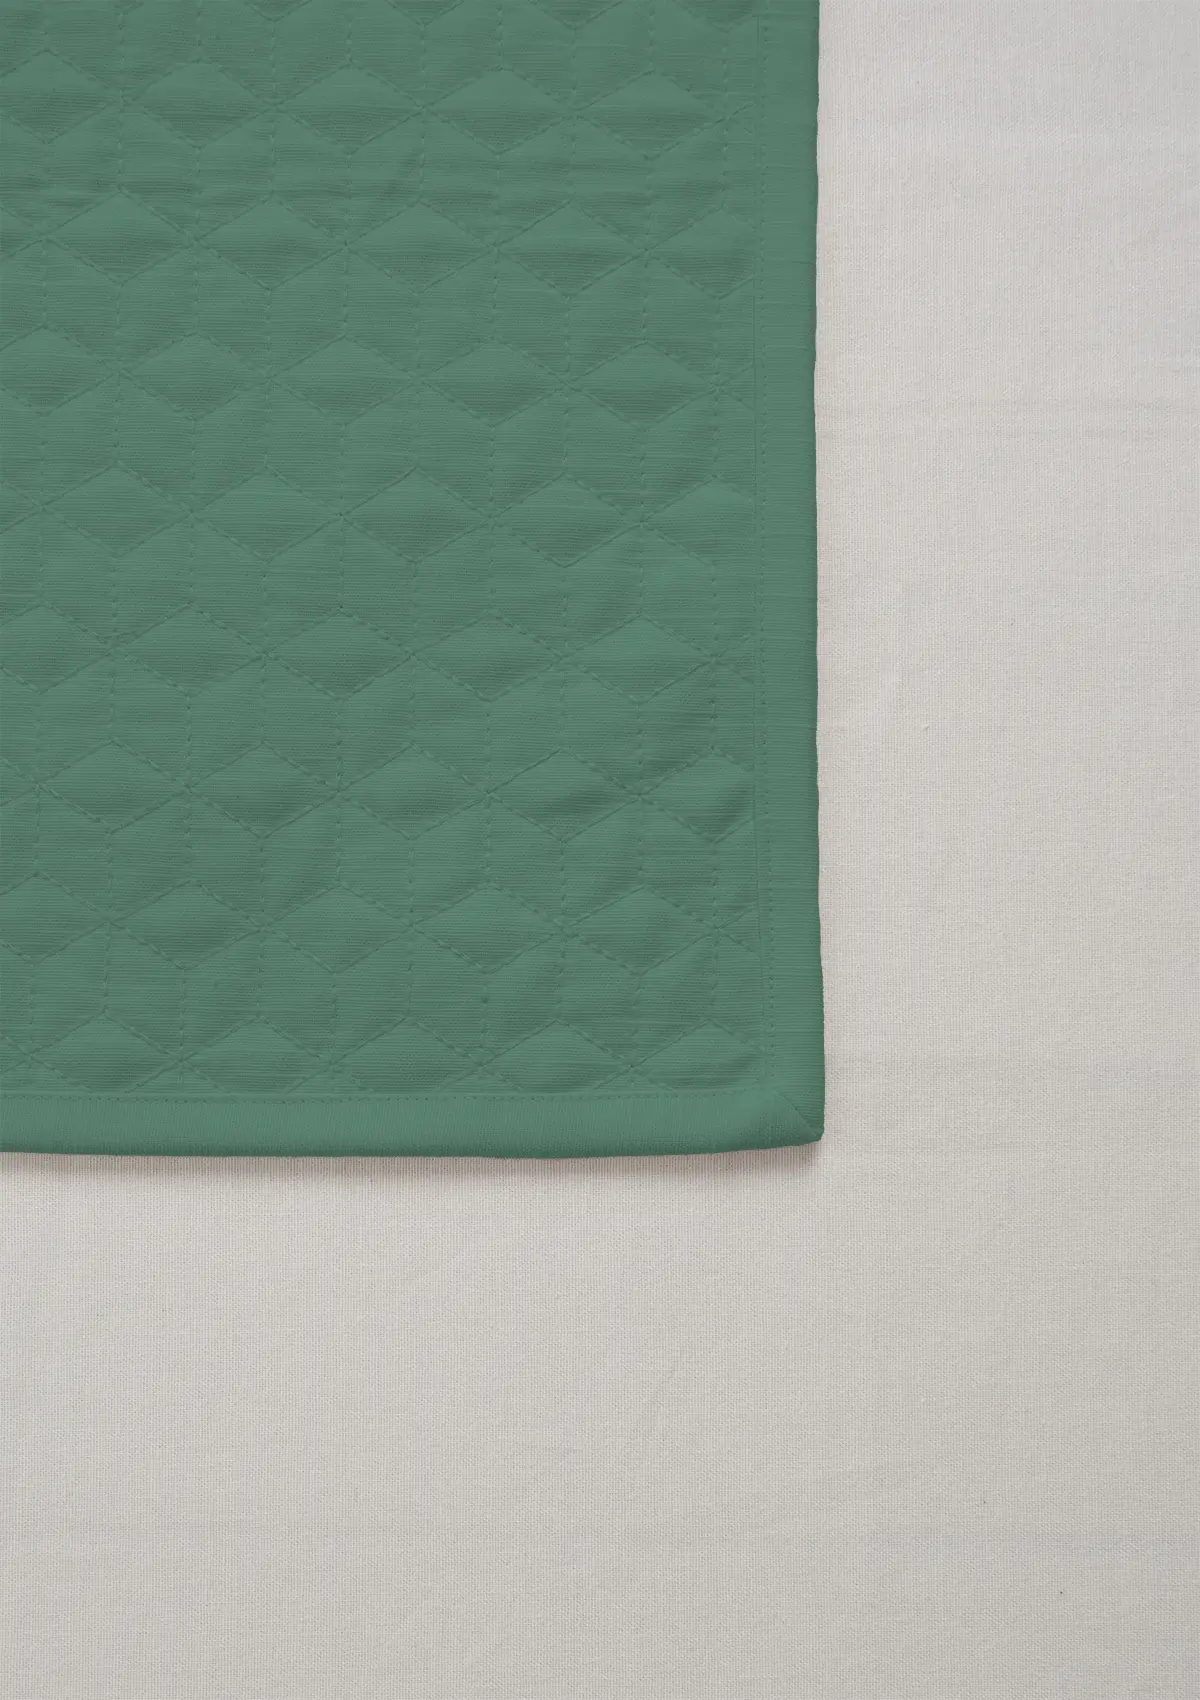 Solid aqua blue 100% cotton quilted placemat for 4 seater or 6 seater dining